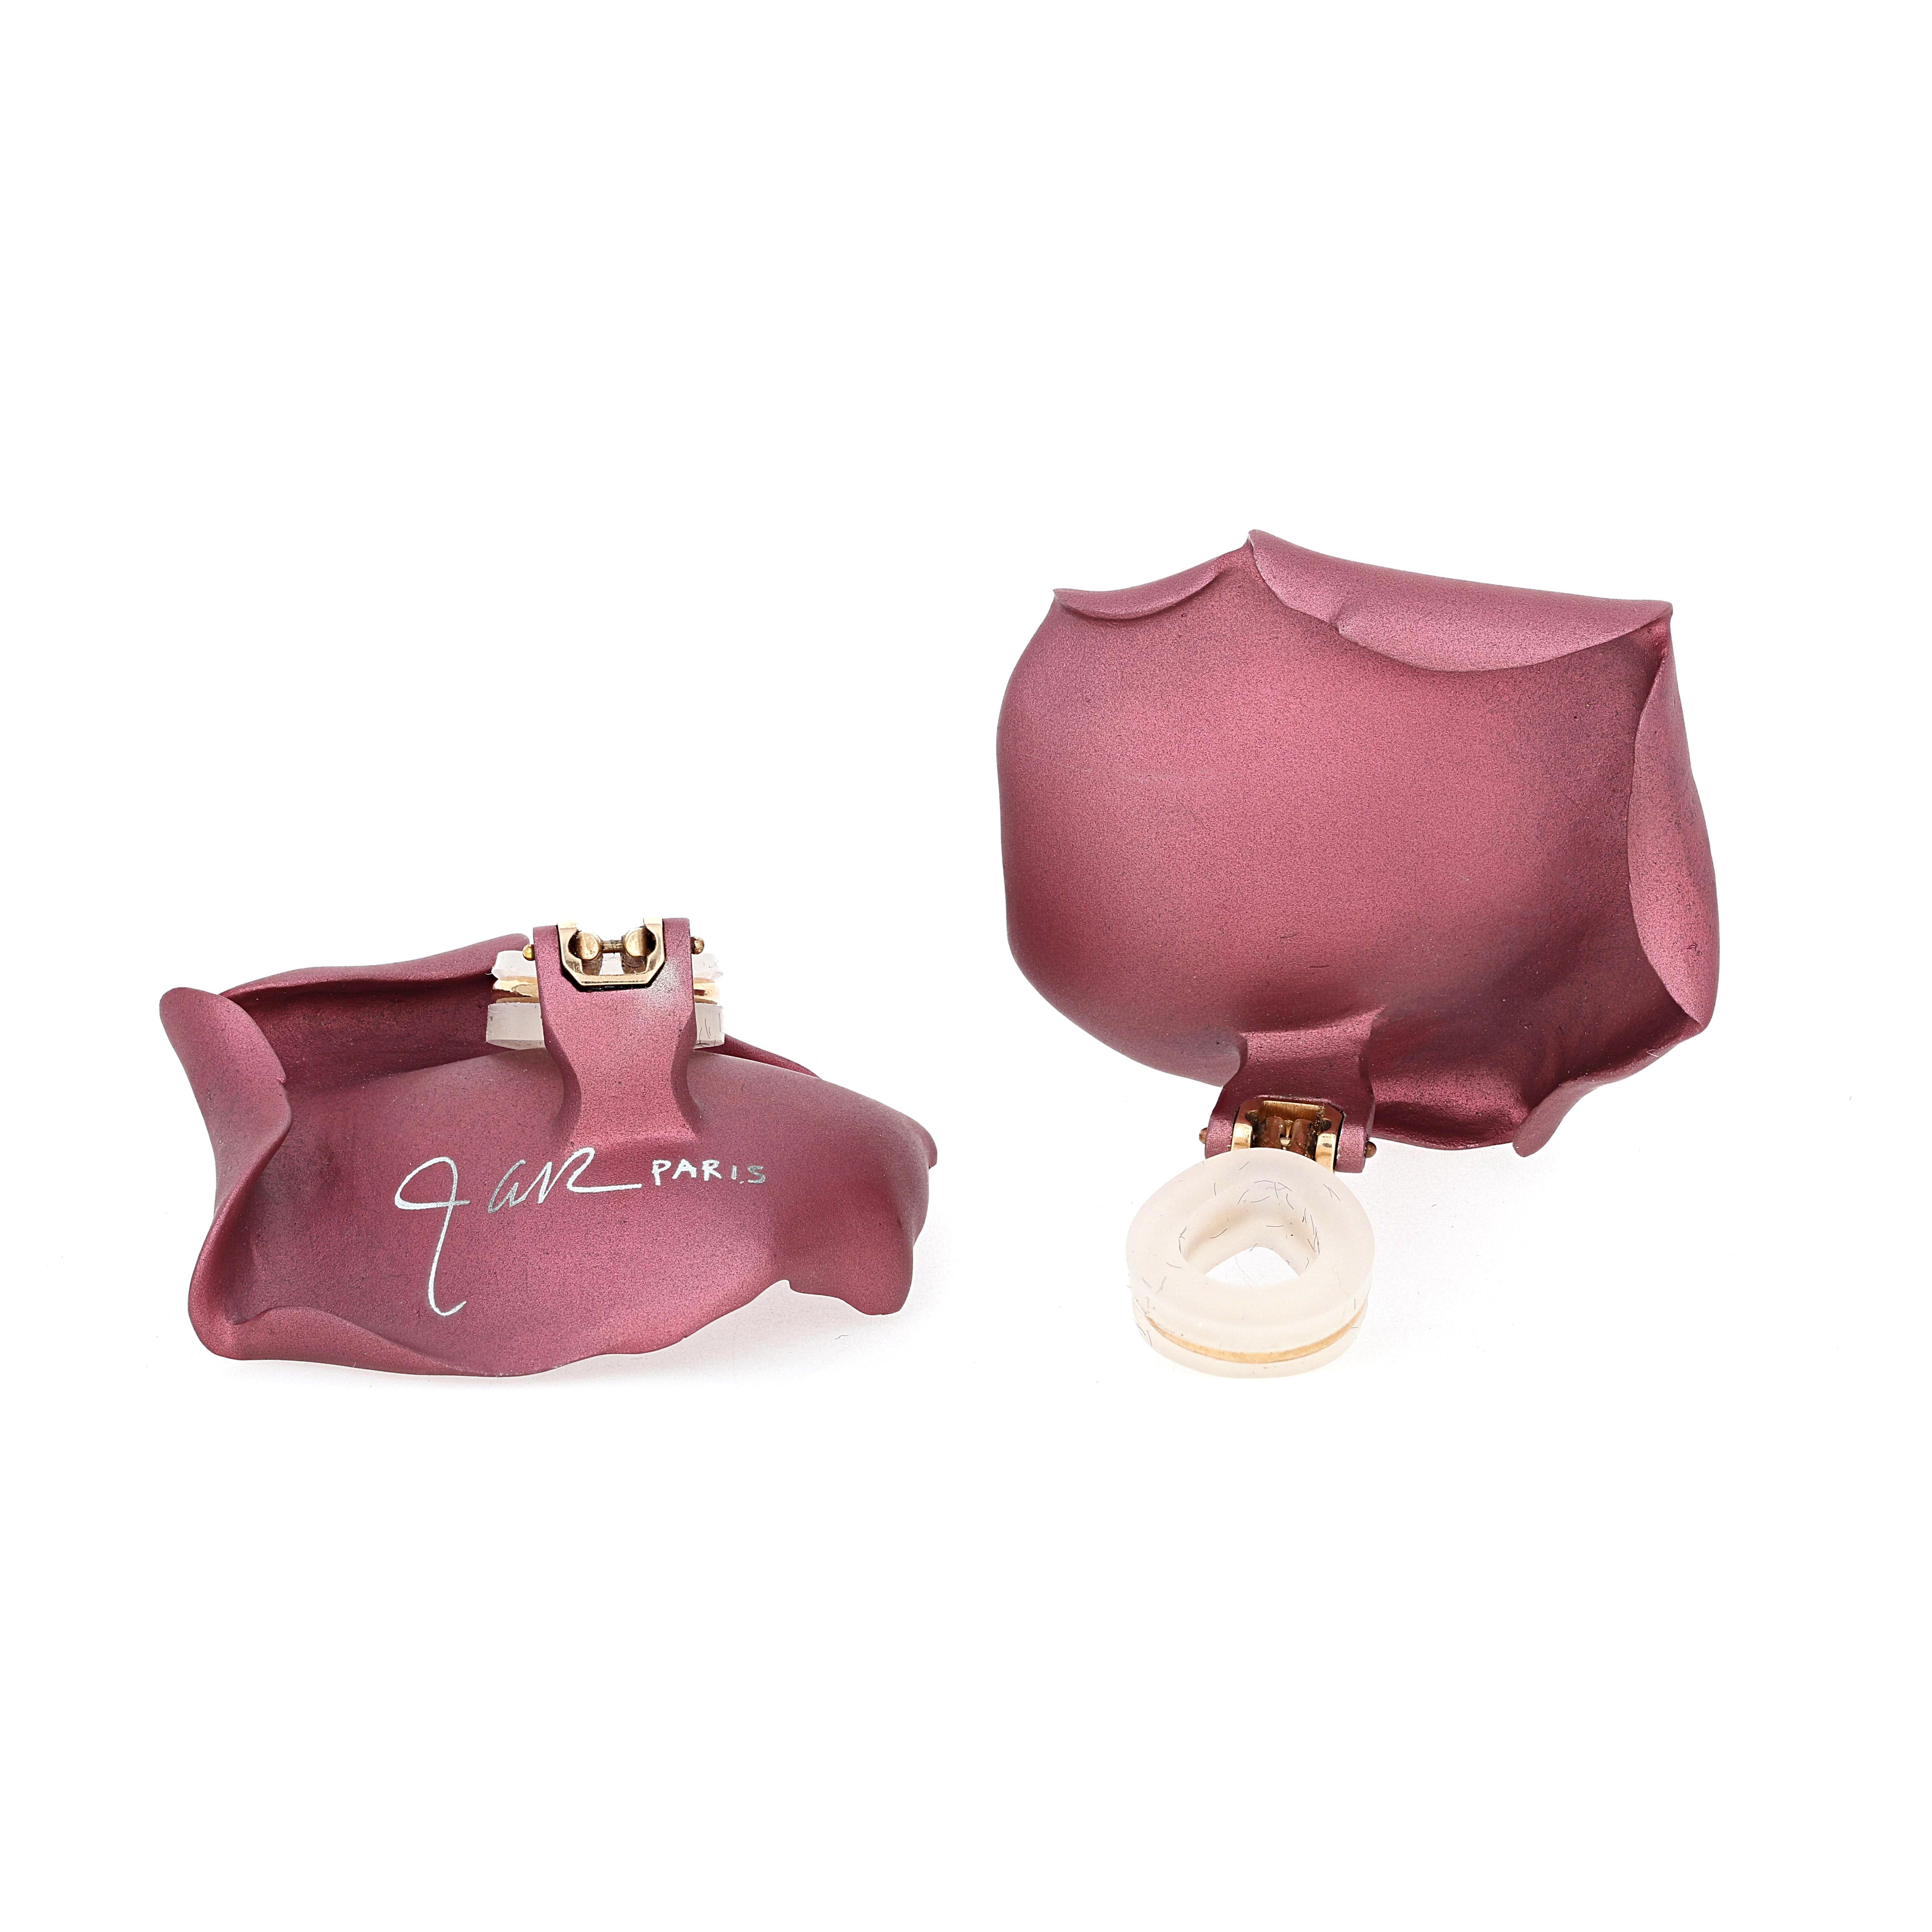 These unique Purplish- Pink/ mauve, sculpted aluminum earrings are signed 'JAR Paris' for Joel Arthur Rosenthal. They resemble a rose petal and have a beautiful matte finish. They are clip-on earrings and have an 18 karat yellow gold lever